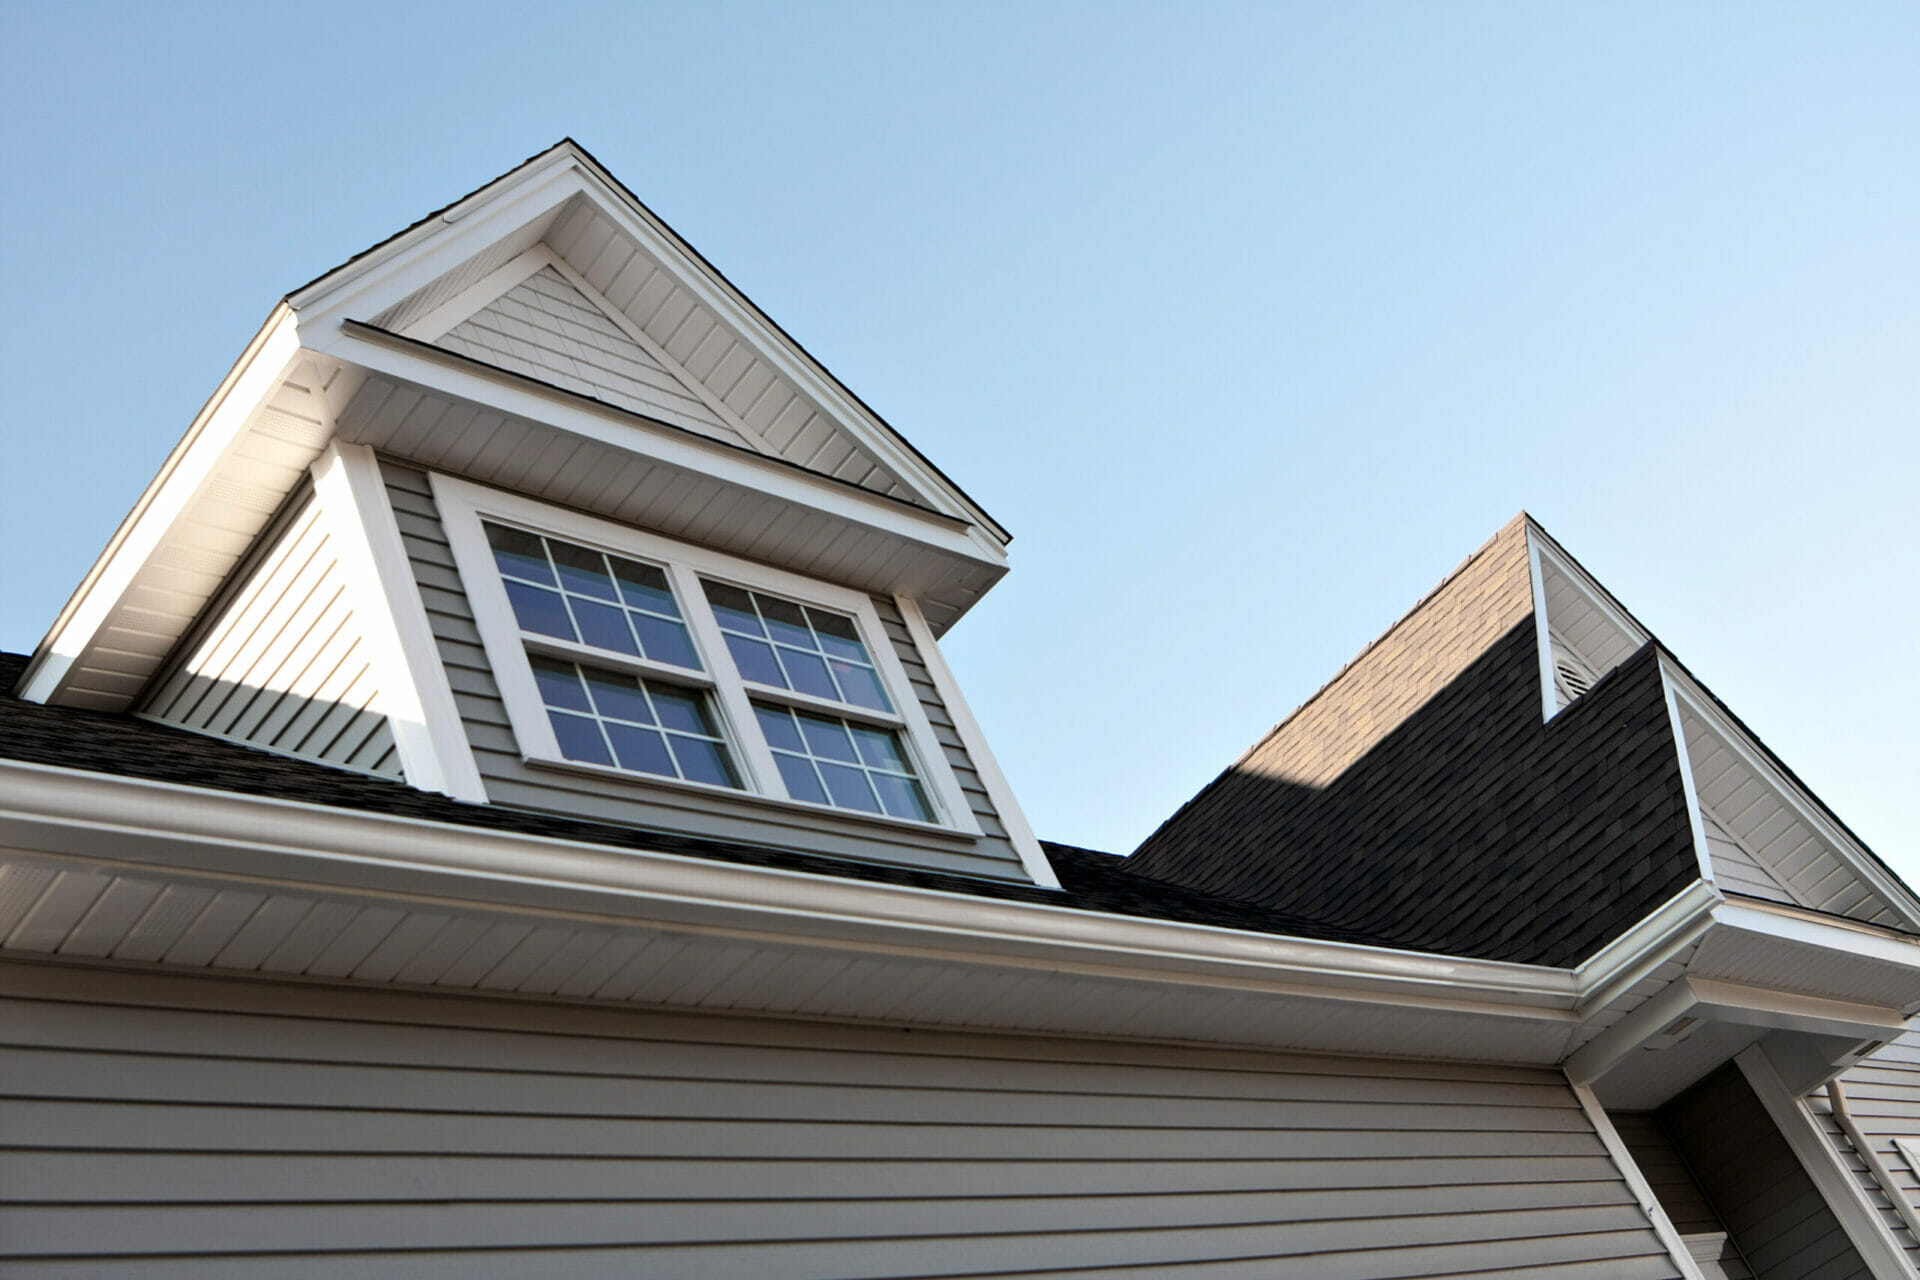 New gutters on suburban home